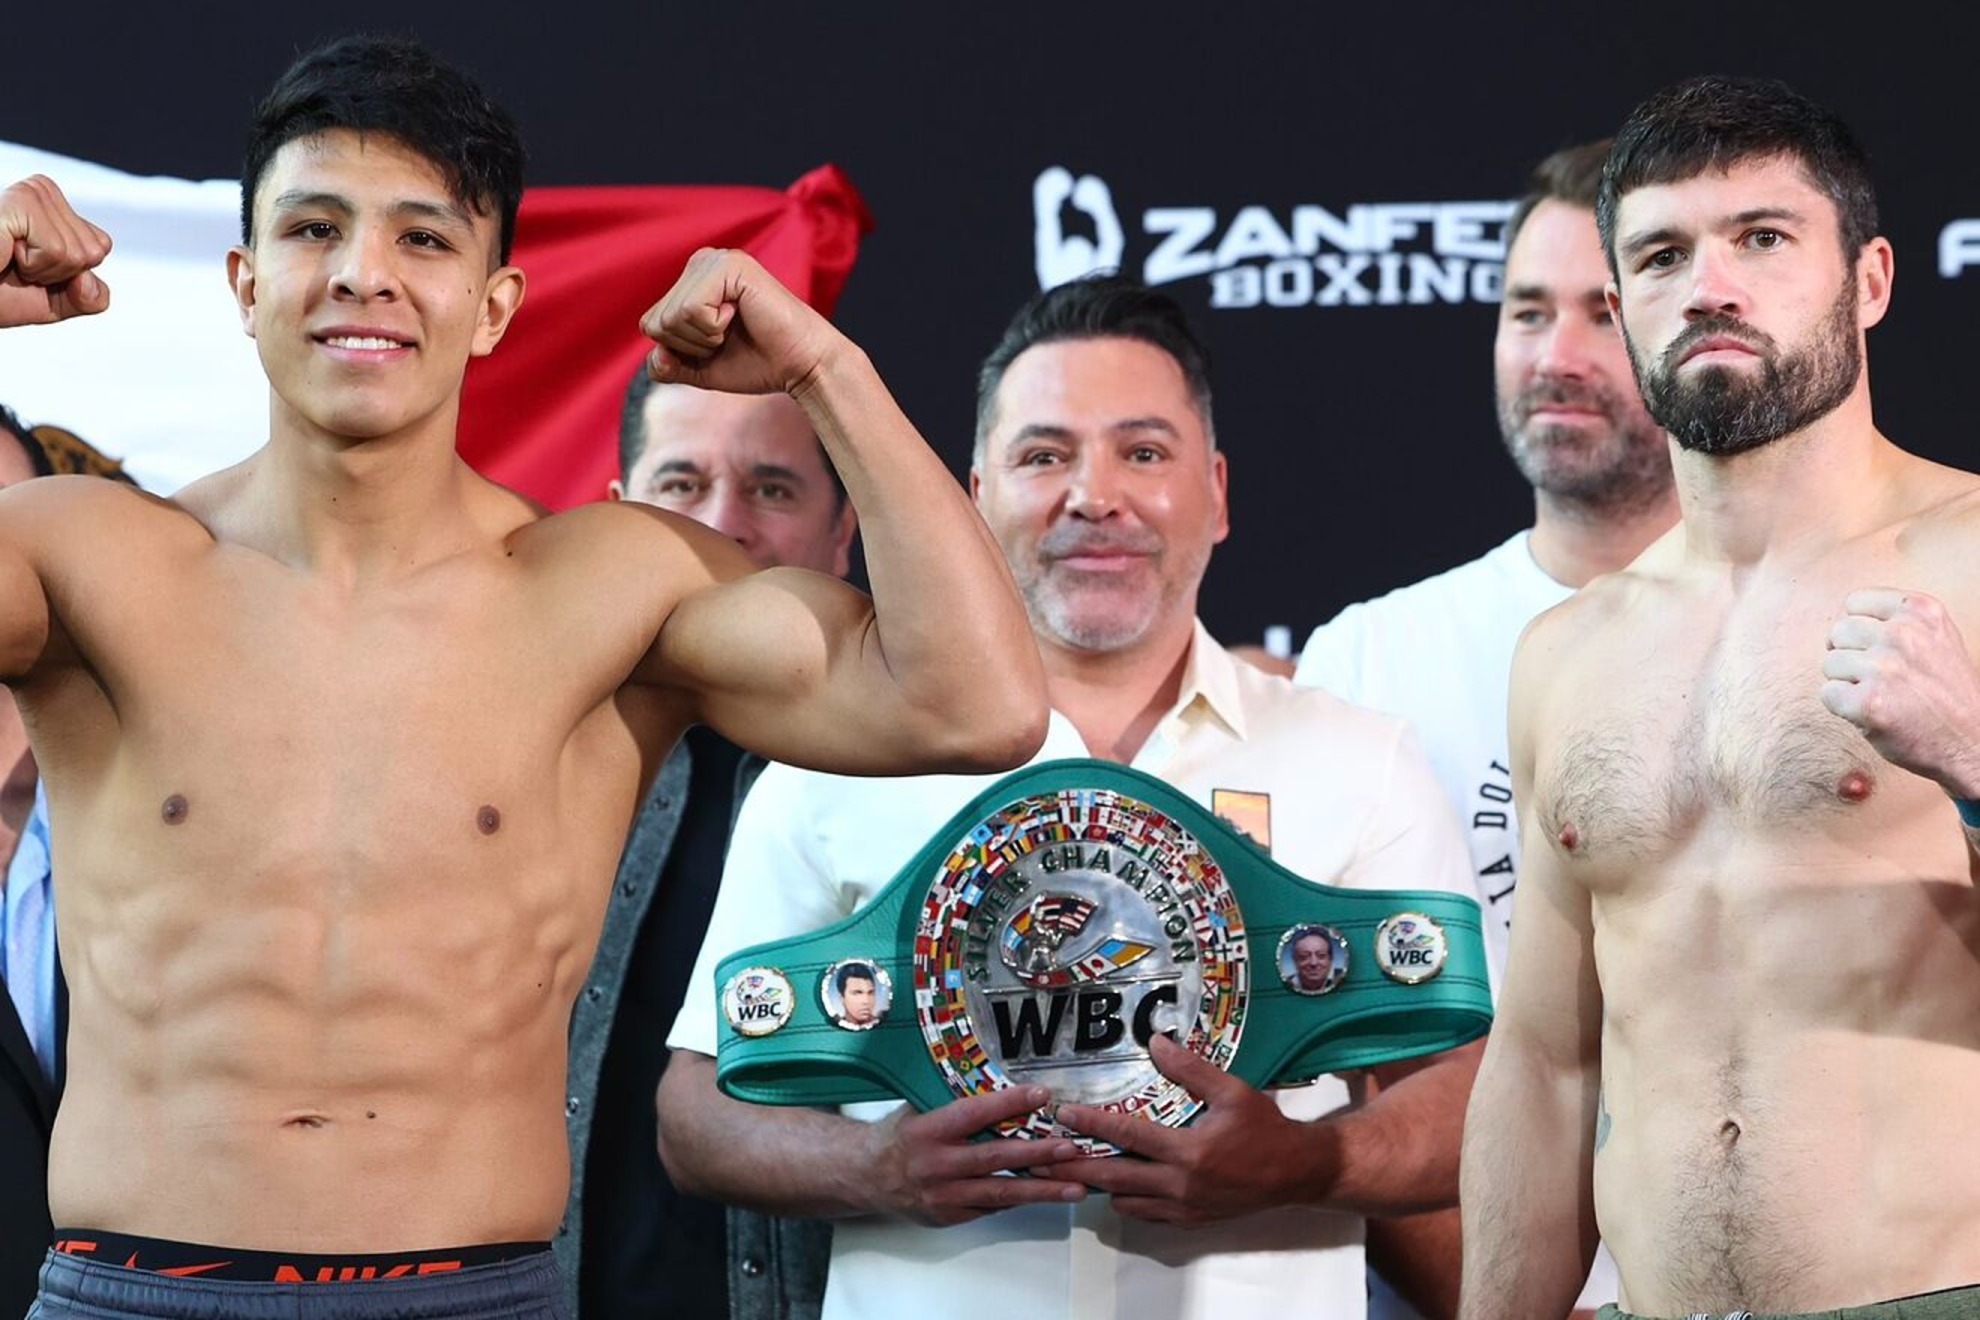 Jaime Munguia Trainer: Who is his legendary trainer who has worked with Tyson and De la Hoya?